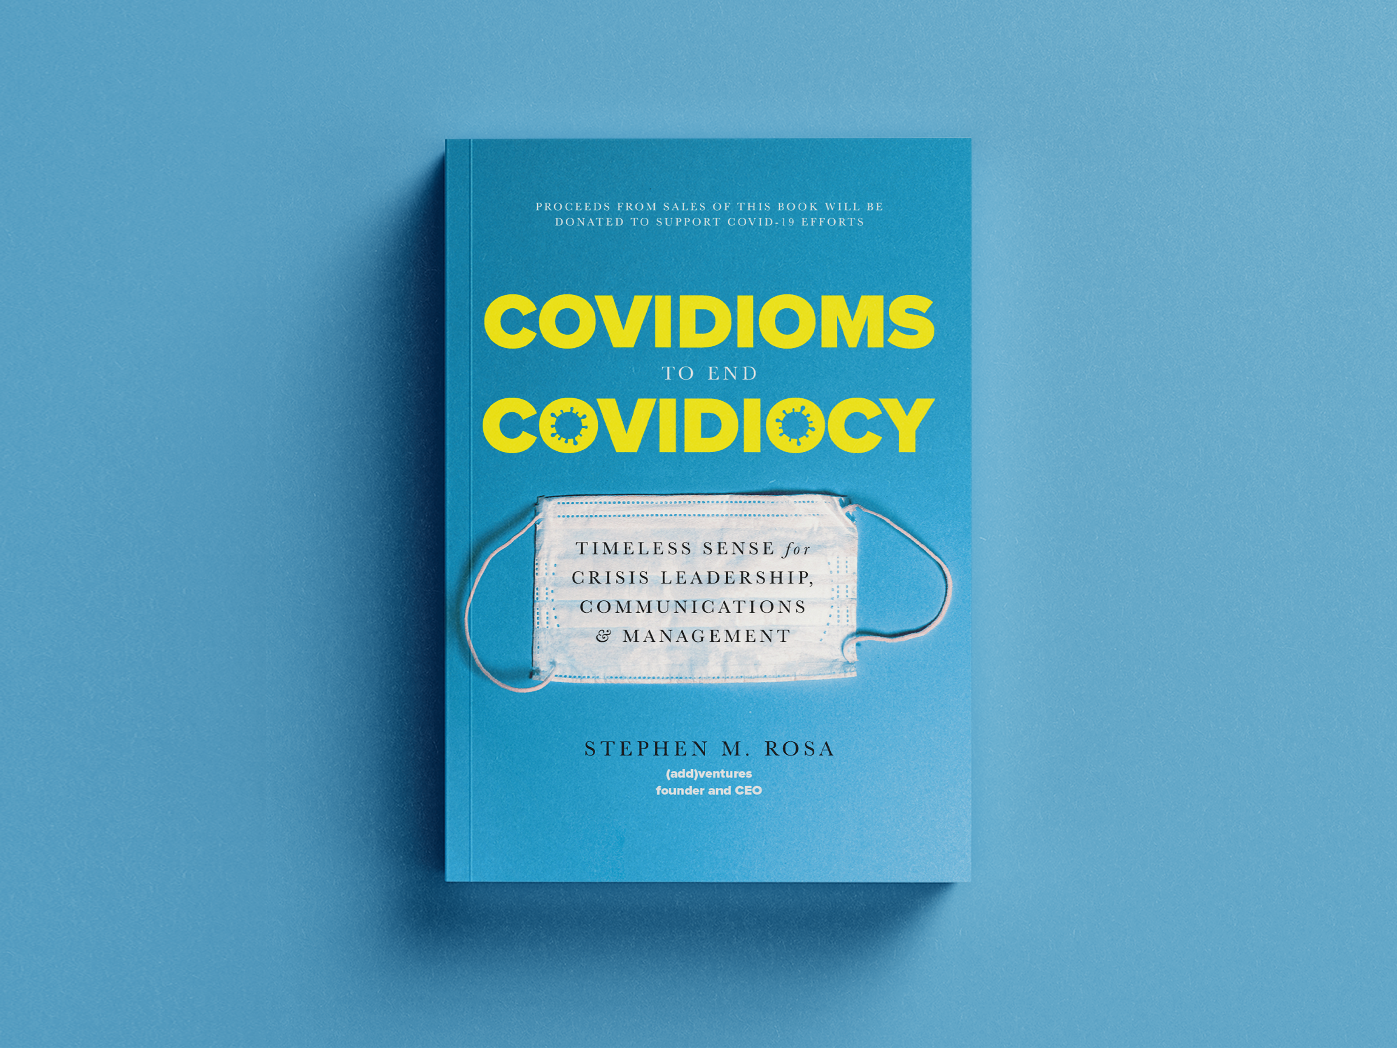 "COVIDIOMS to end COVIDIOCY: Timeless Sense for Crisis Leaders" - Image of a mask on a blue book cover.